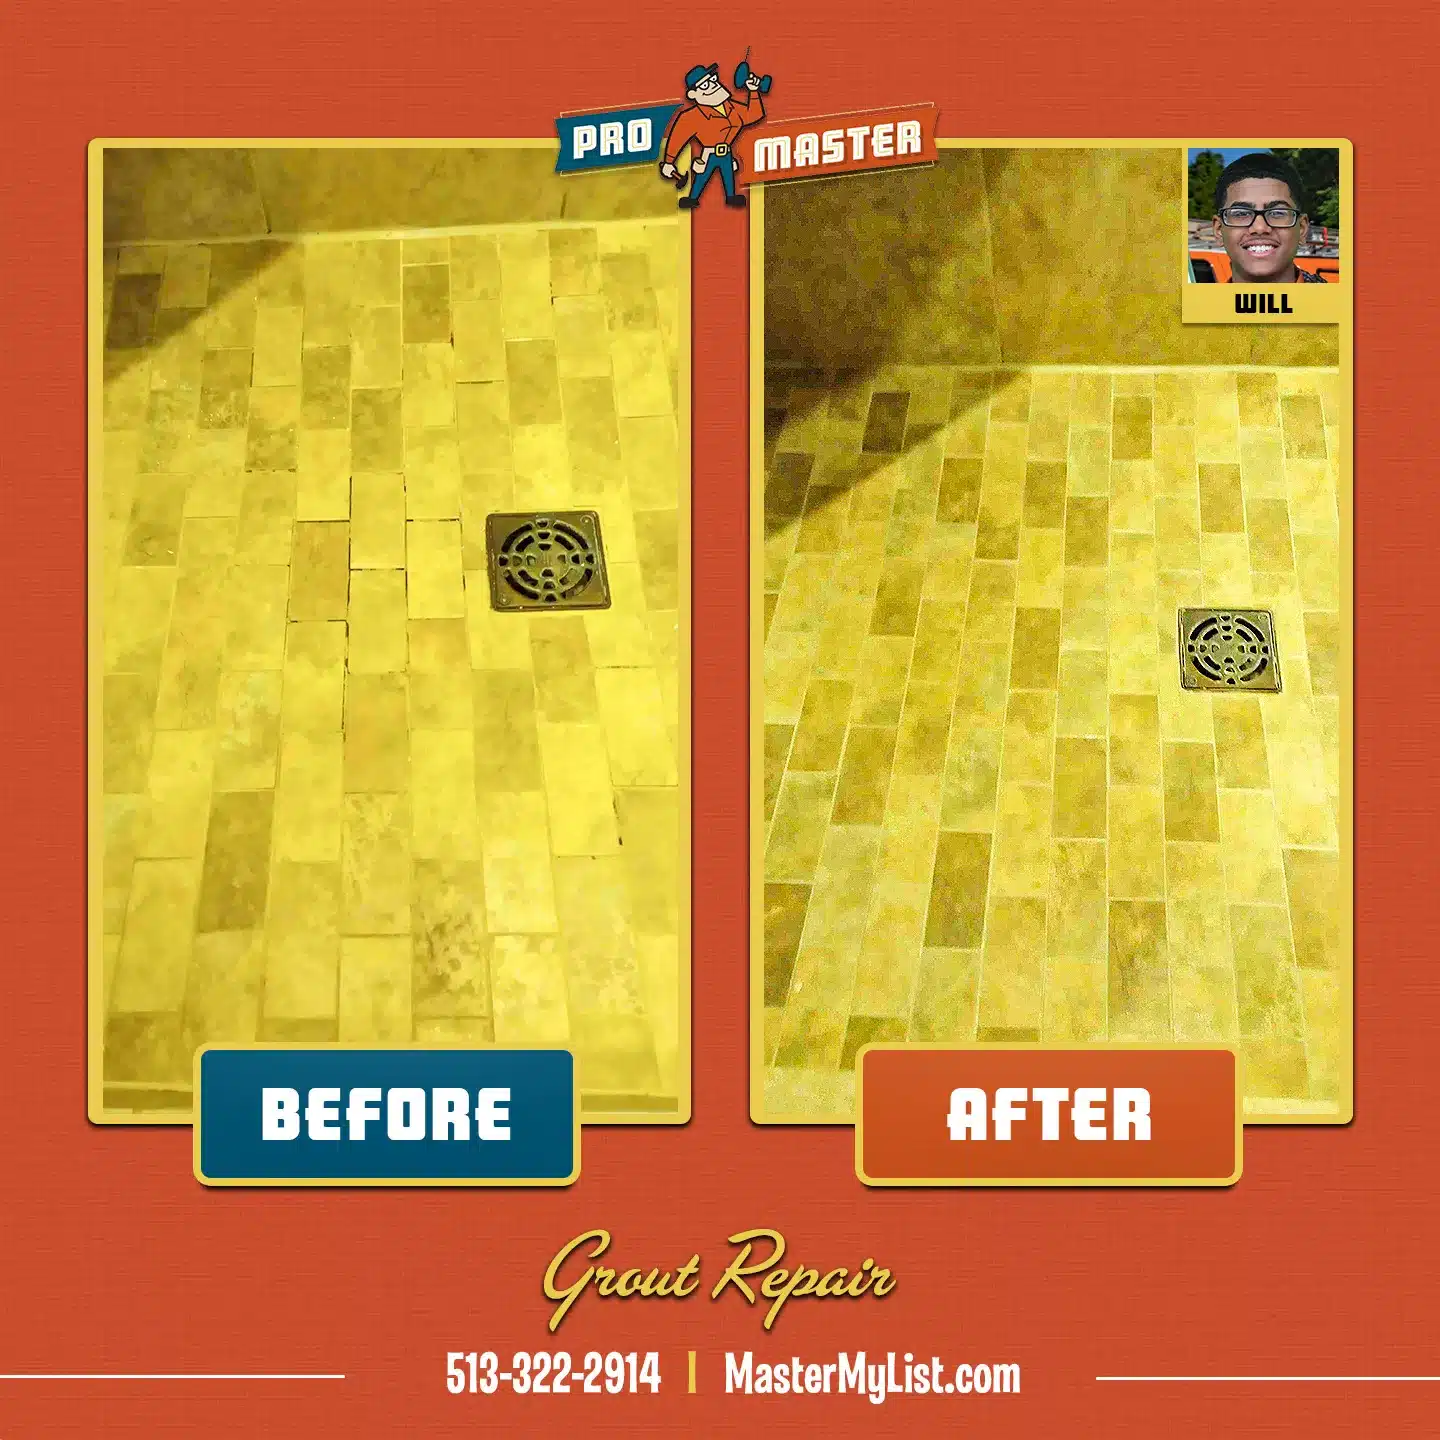 Before and After Image of Grout Repair for Tile Installation in Cincinnati, OH.